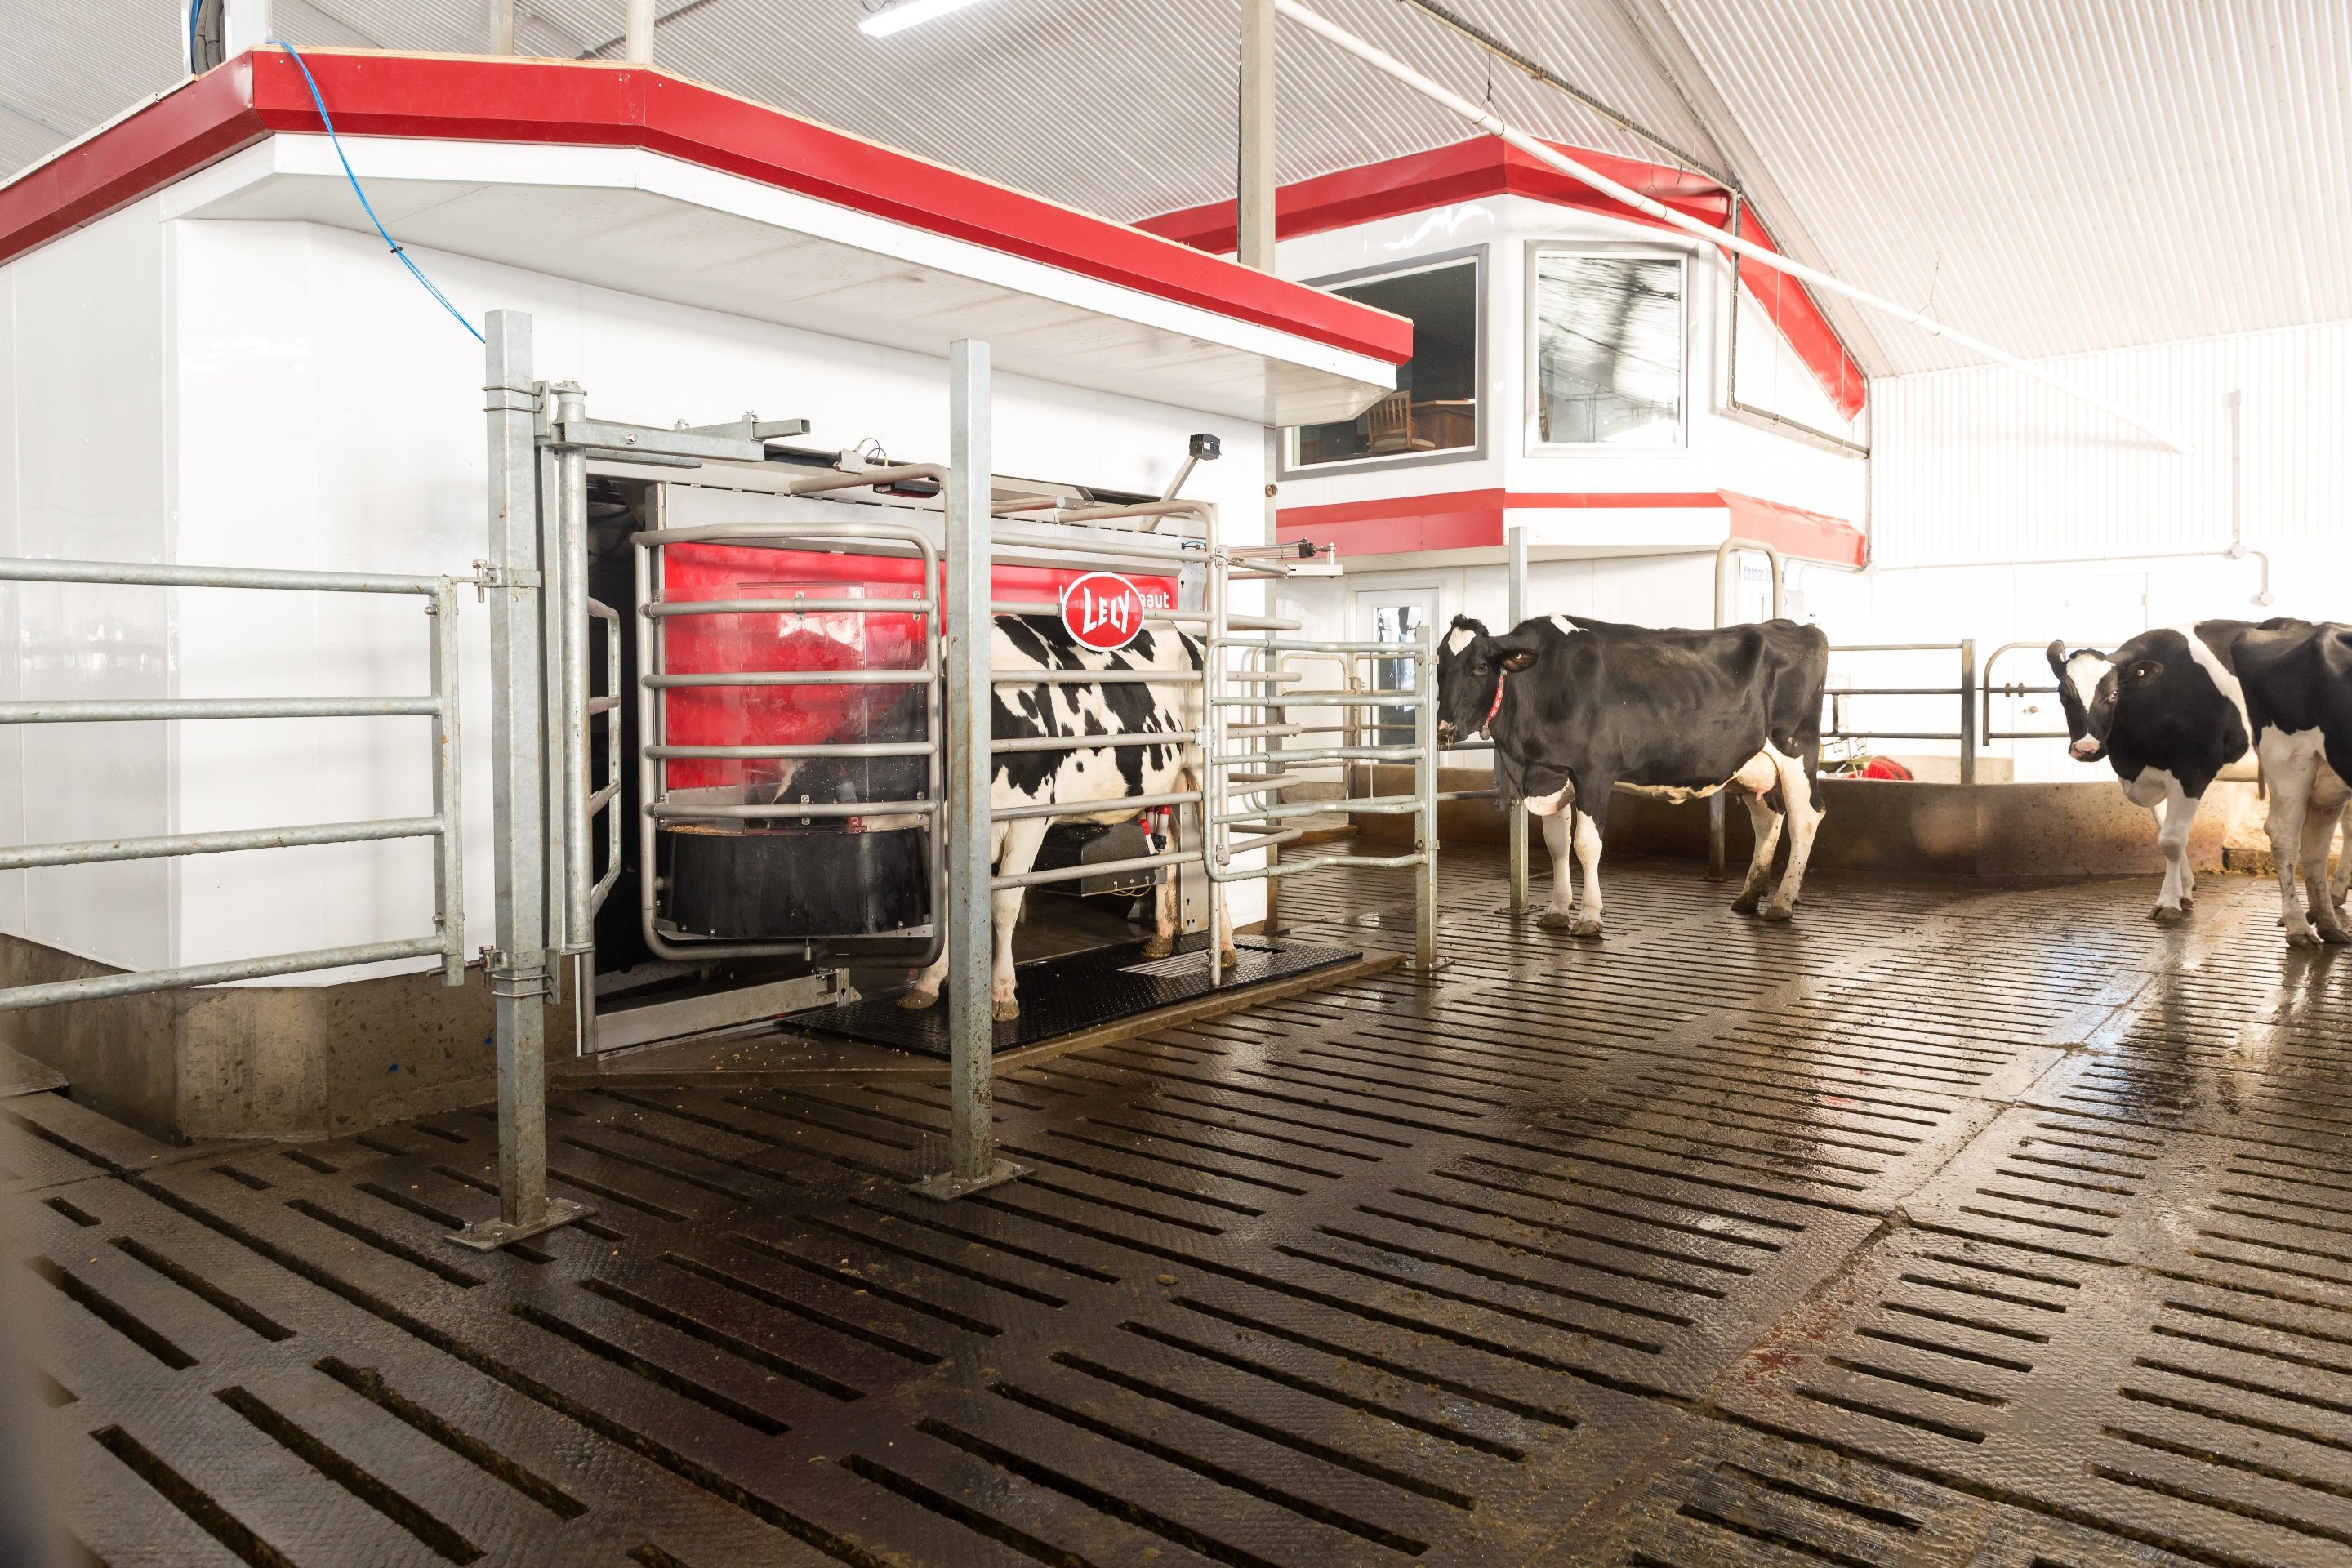 Lely Astronaut 5 robotic milking redesigned for cow-comfort.